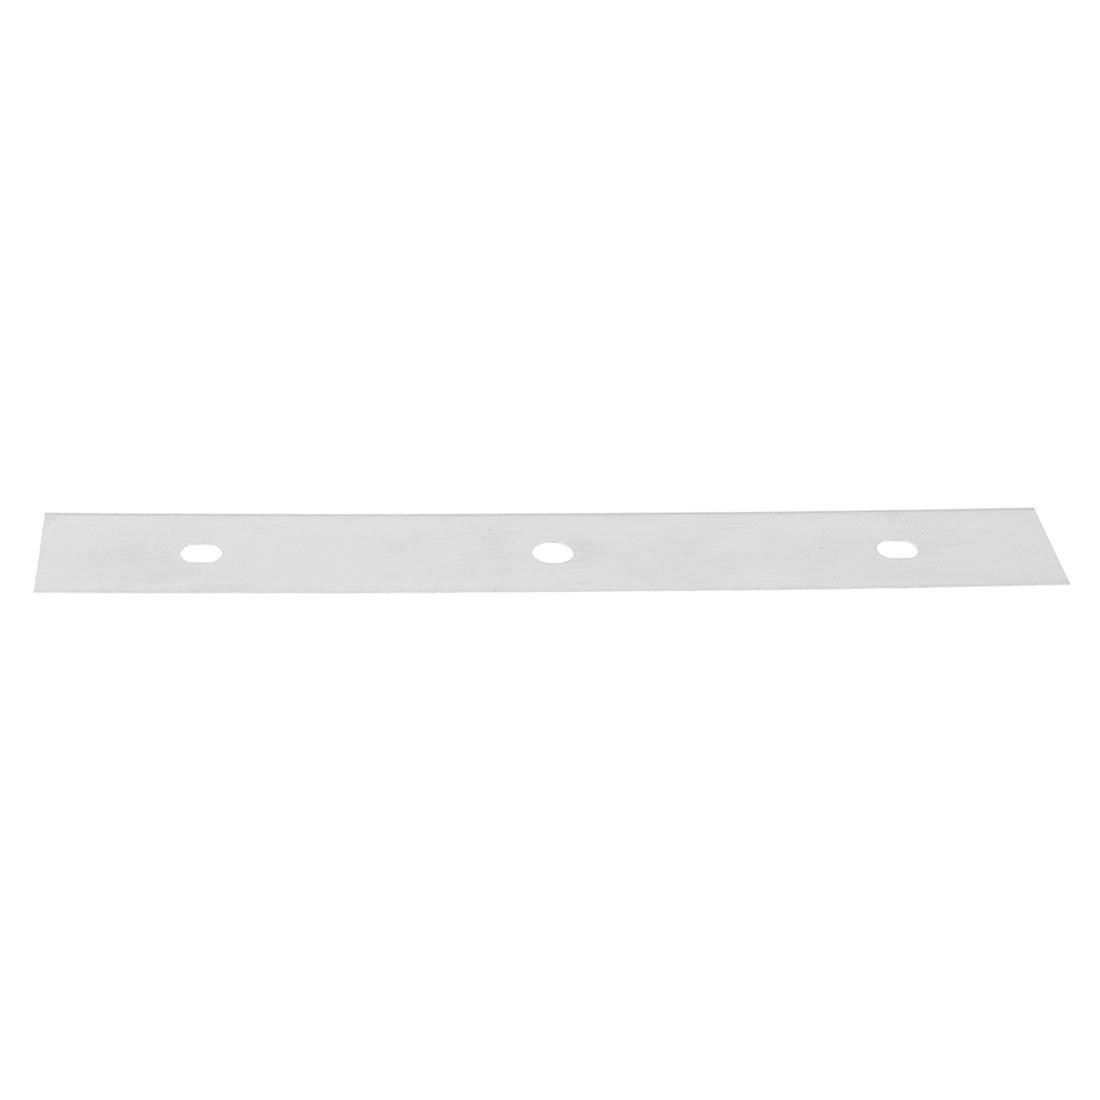 World Enterprises Universal Scraper Replacement Blades - 6 Inch Front Angle View